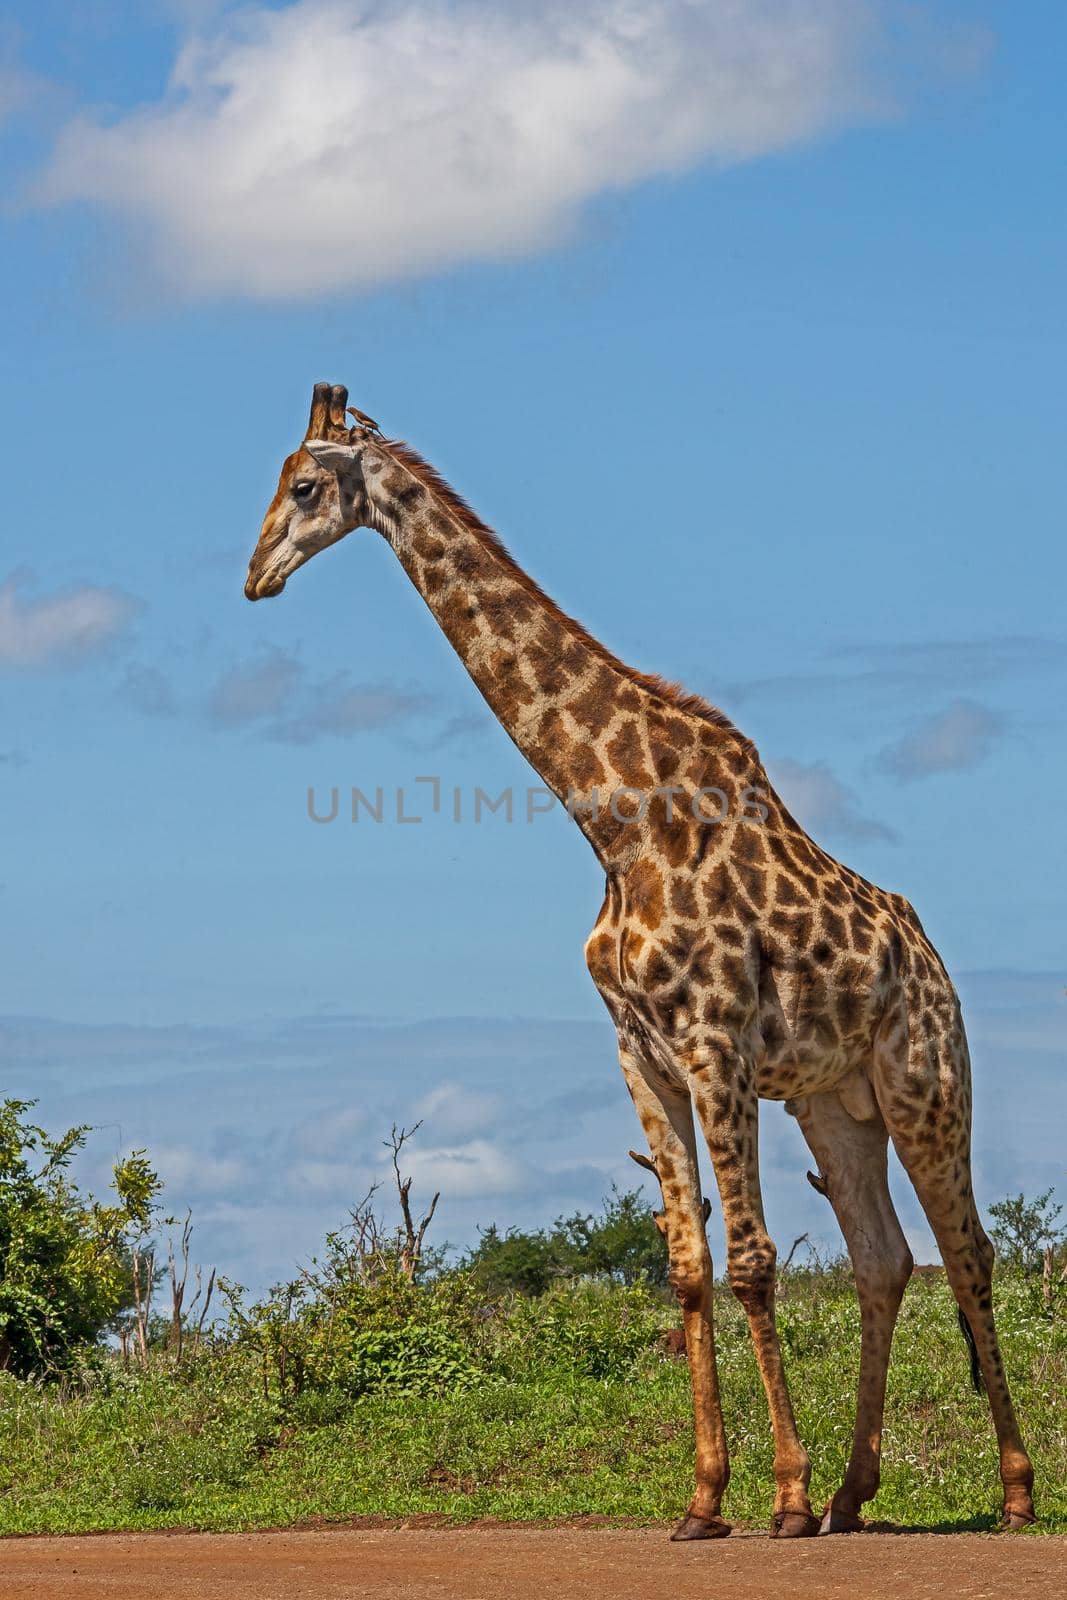 A lone male Giraffe (Giraffa camelopardalis) next to a road in Kruger National Park. South Africa